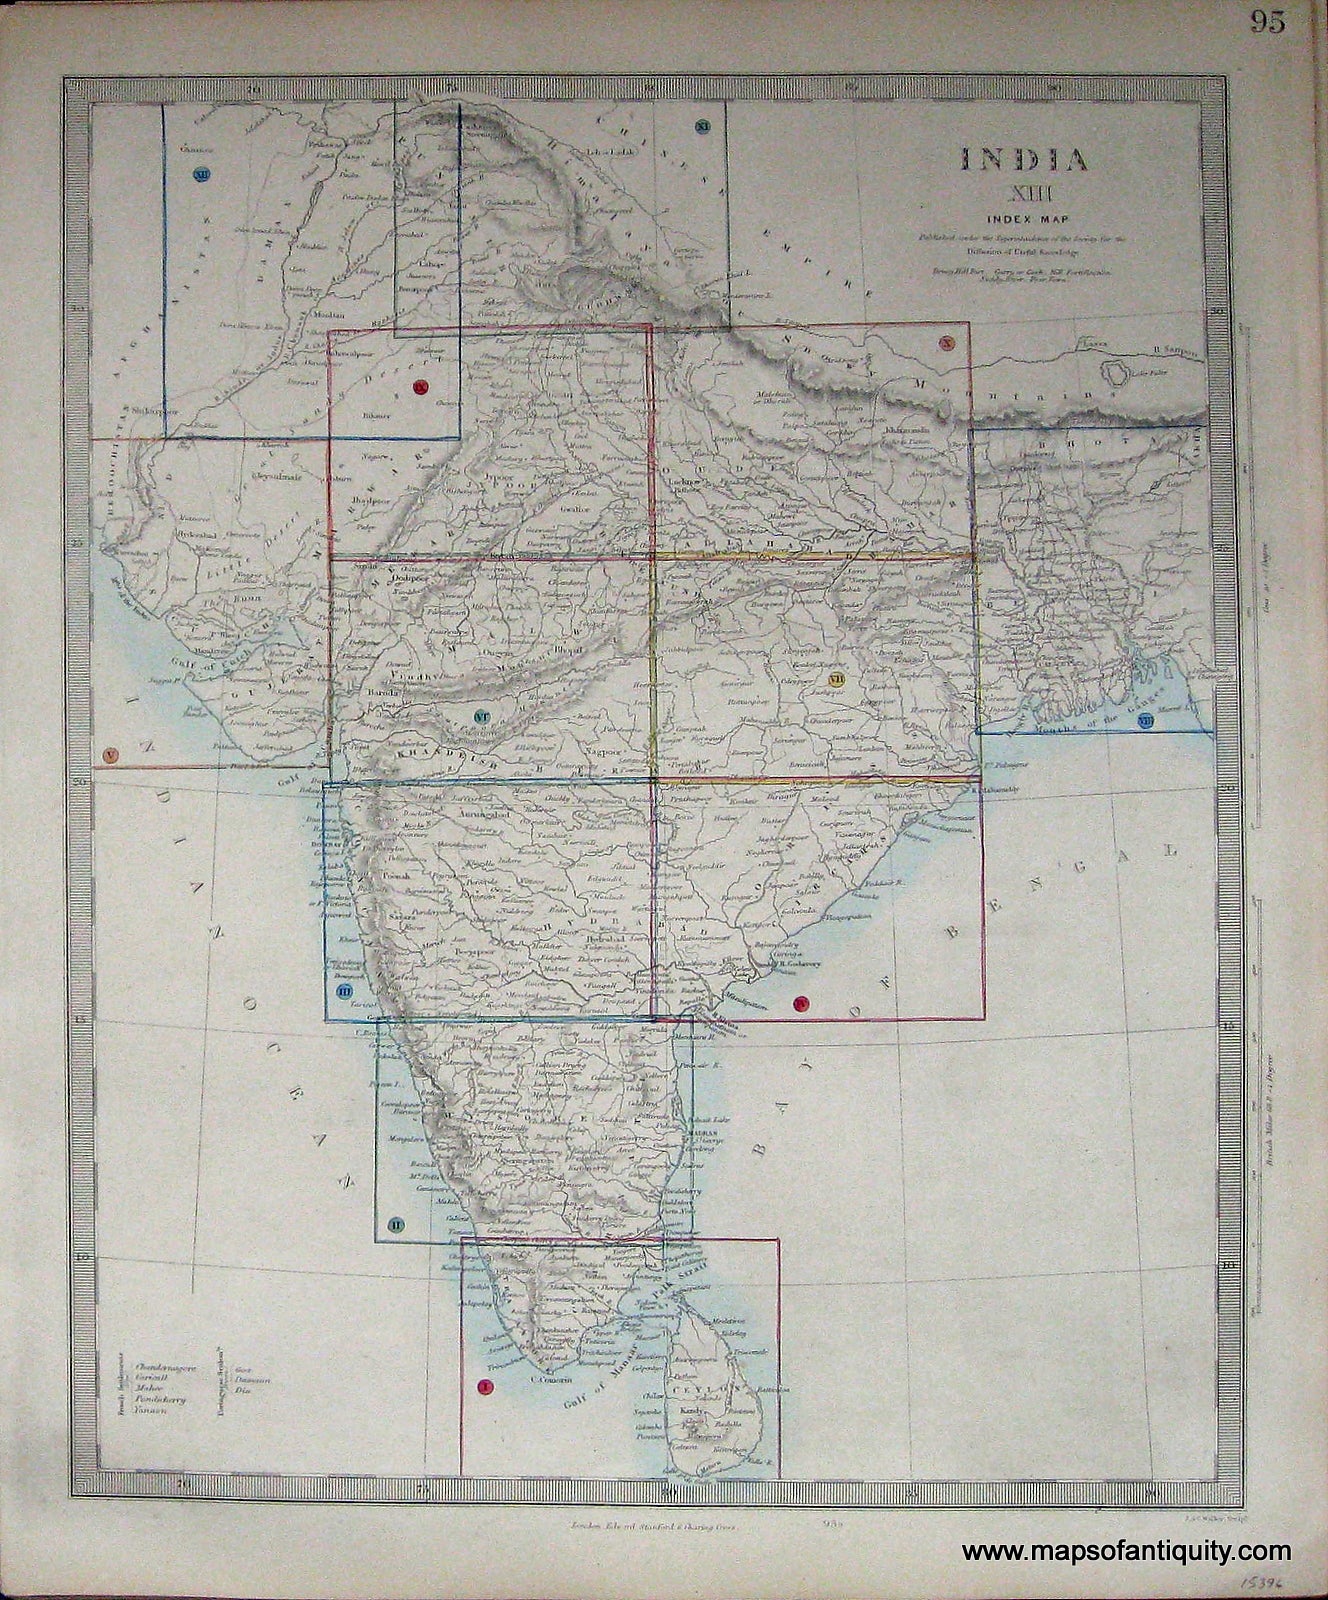 Antique-Hand-Colored-Map-India-XIII-Index-Map-Published-under-the-Superintendence-of-the-SDUK/Society-for-the-Diffusion-of-Useful-Knowledge.-Asia-India-1845-(circa-1845)-SDUK/Society-for-the-Diffusion-of-Useful-Knowledge-Maps-Of-Antiquity